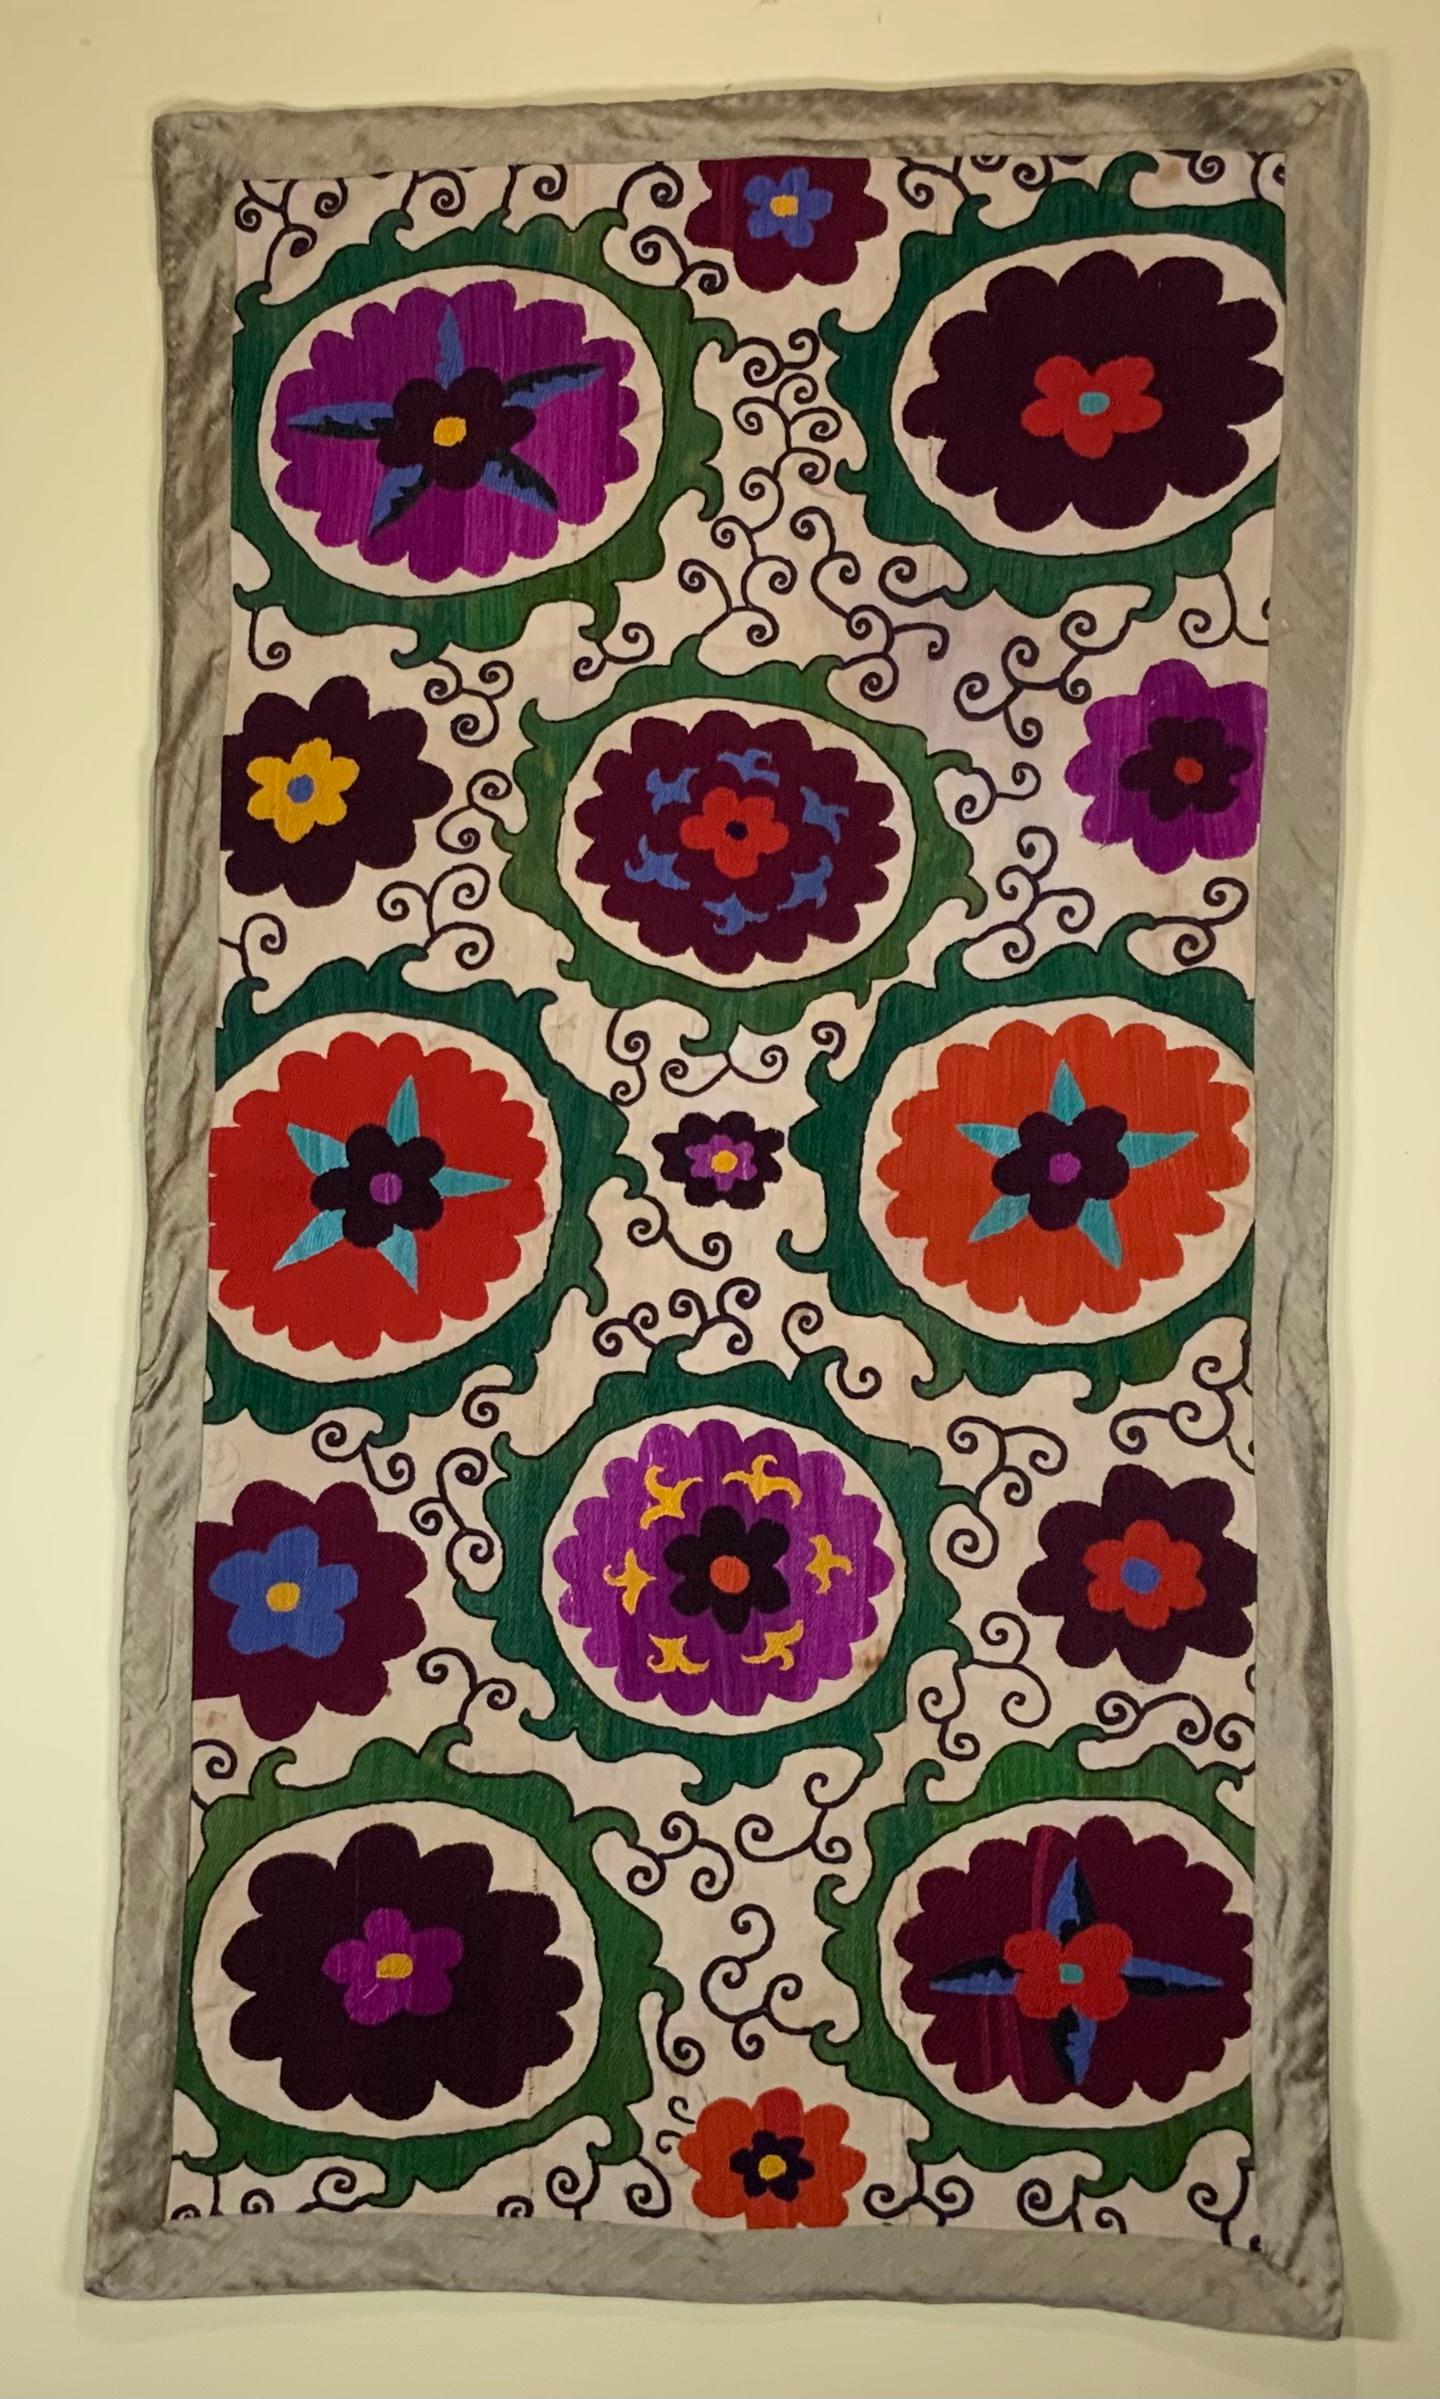 Antique Suzani textile made of hand embroidery intricate scrolling of eight large flowers motifs on a handwoven cotton background. Professionally cleaned and backed with fine textile.
Could use as wall hanging or on top of table or